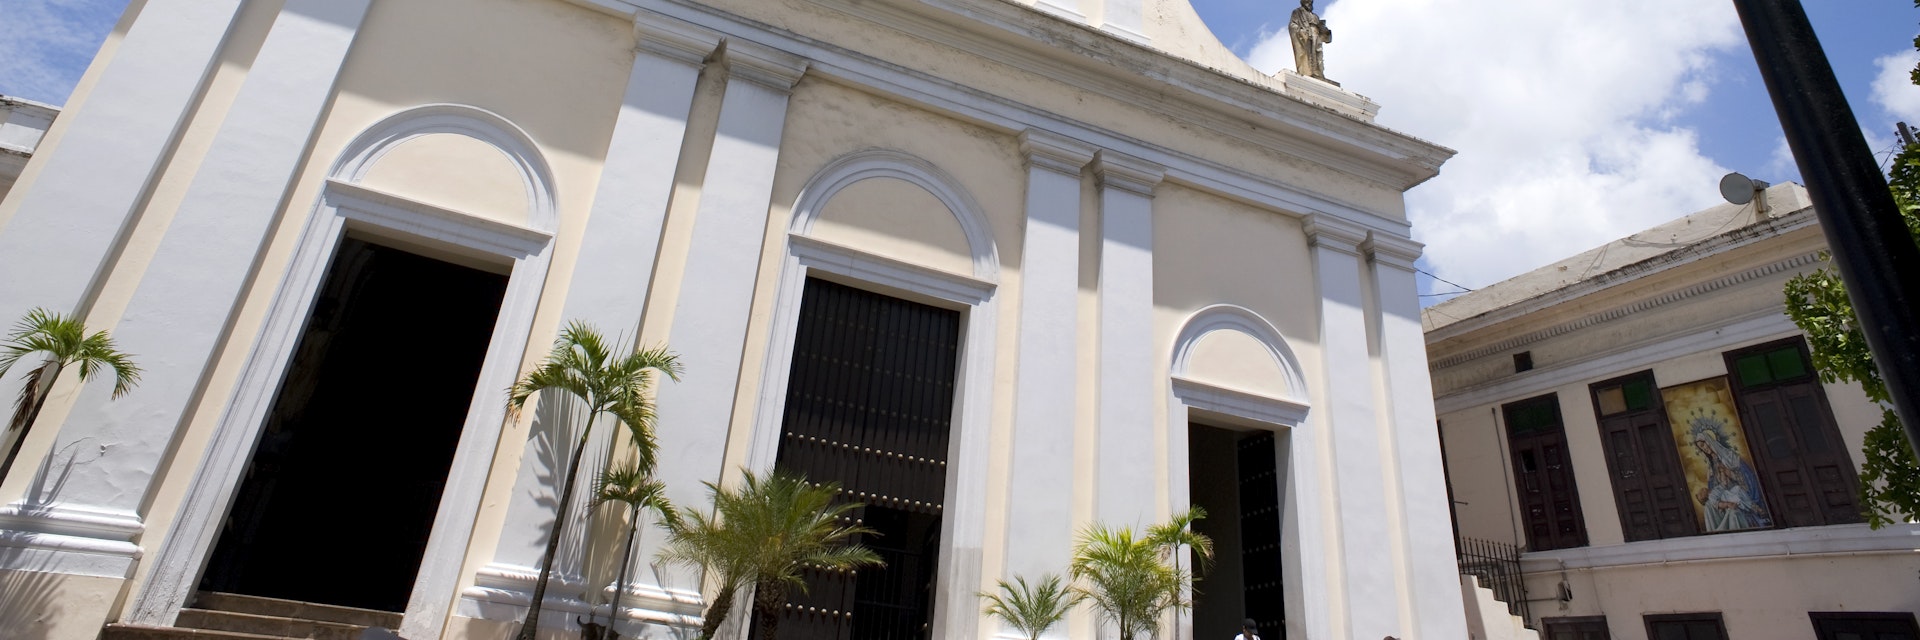 White-washed facade of Cathedral de San Juan.